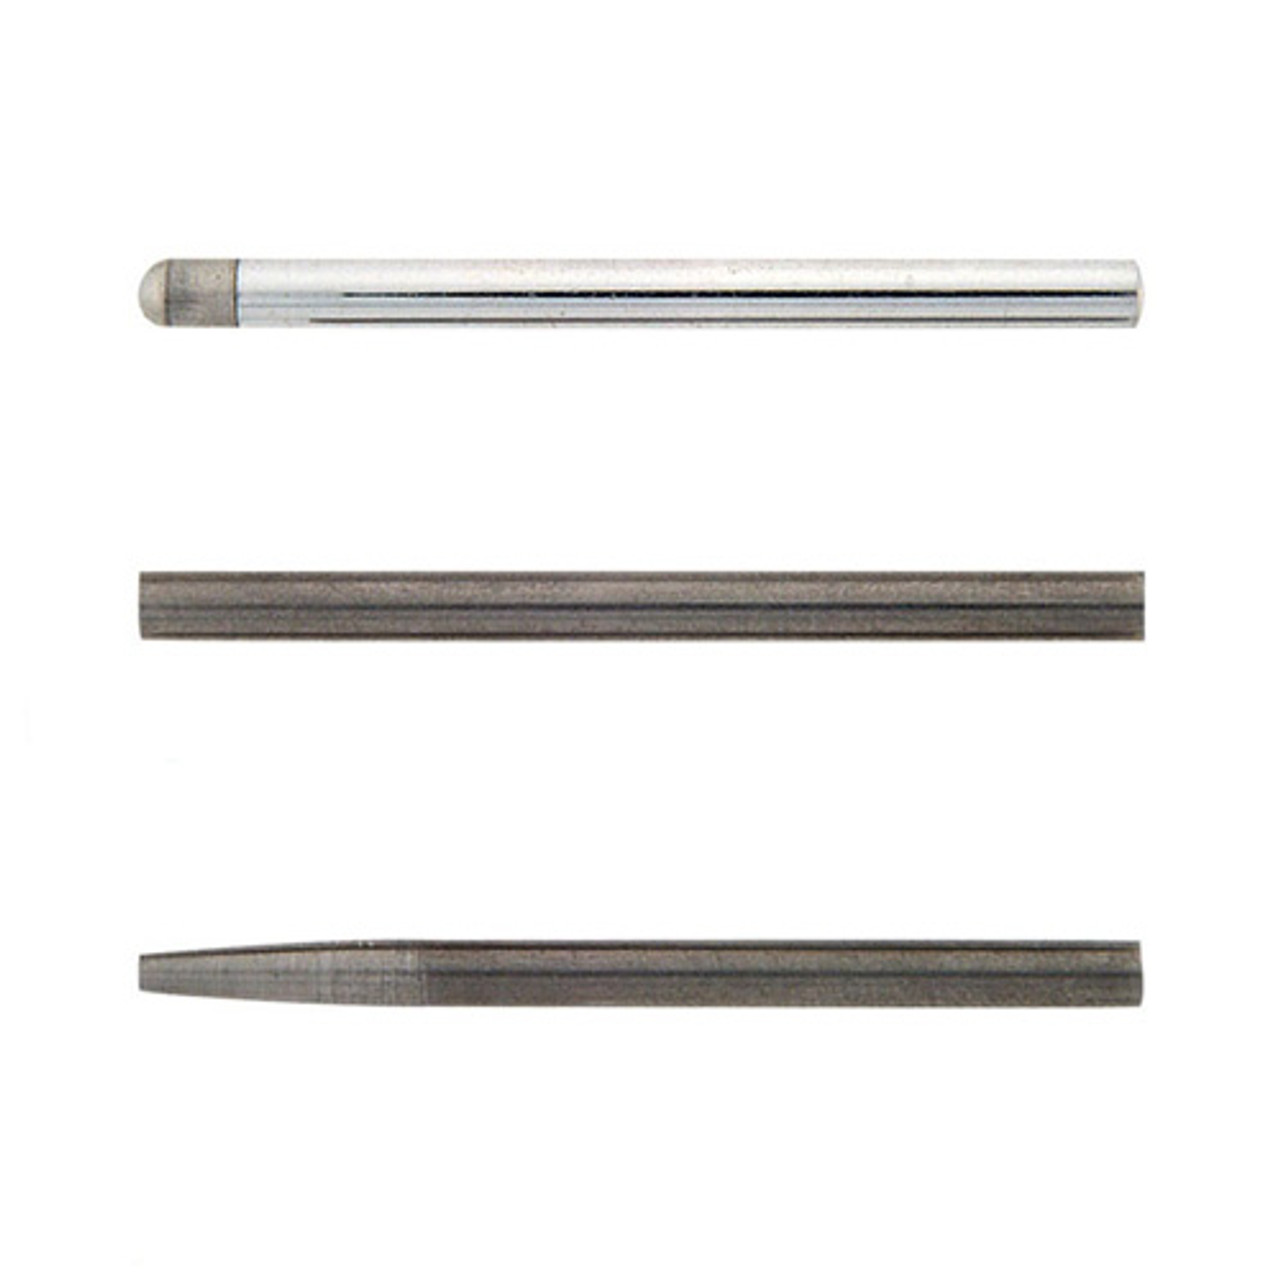 Weldmax Magnetic Electrodes & Holders - Round Electrode, 2x50x3mm